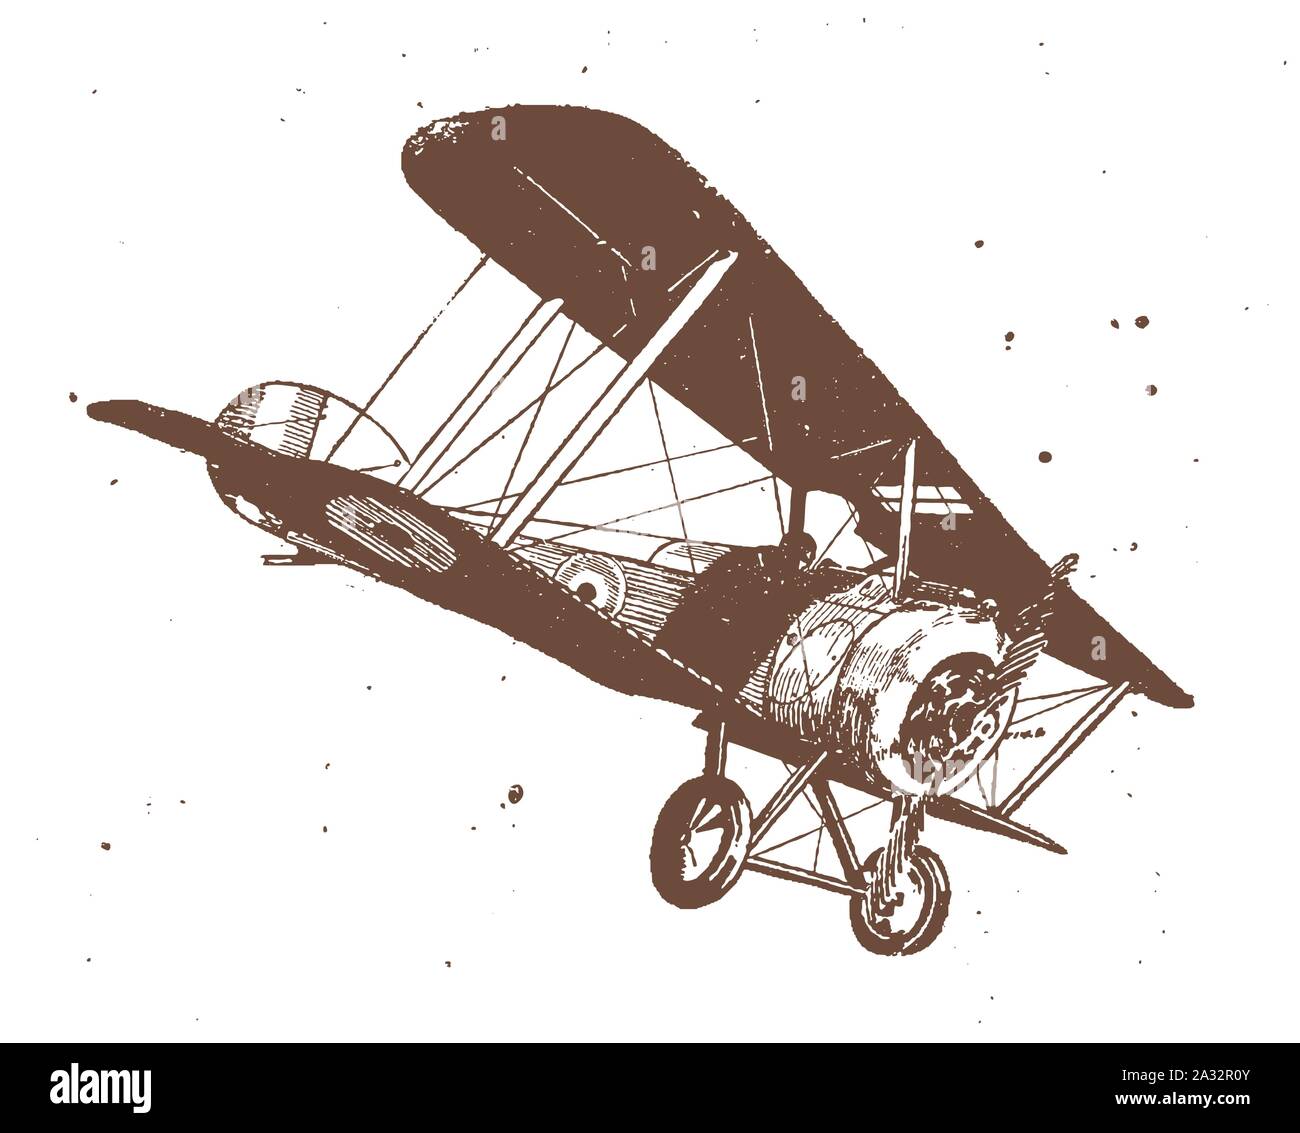 Flying historic biplane pitching down. Illustration after a lithography from the early 20th century Stock Vector